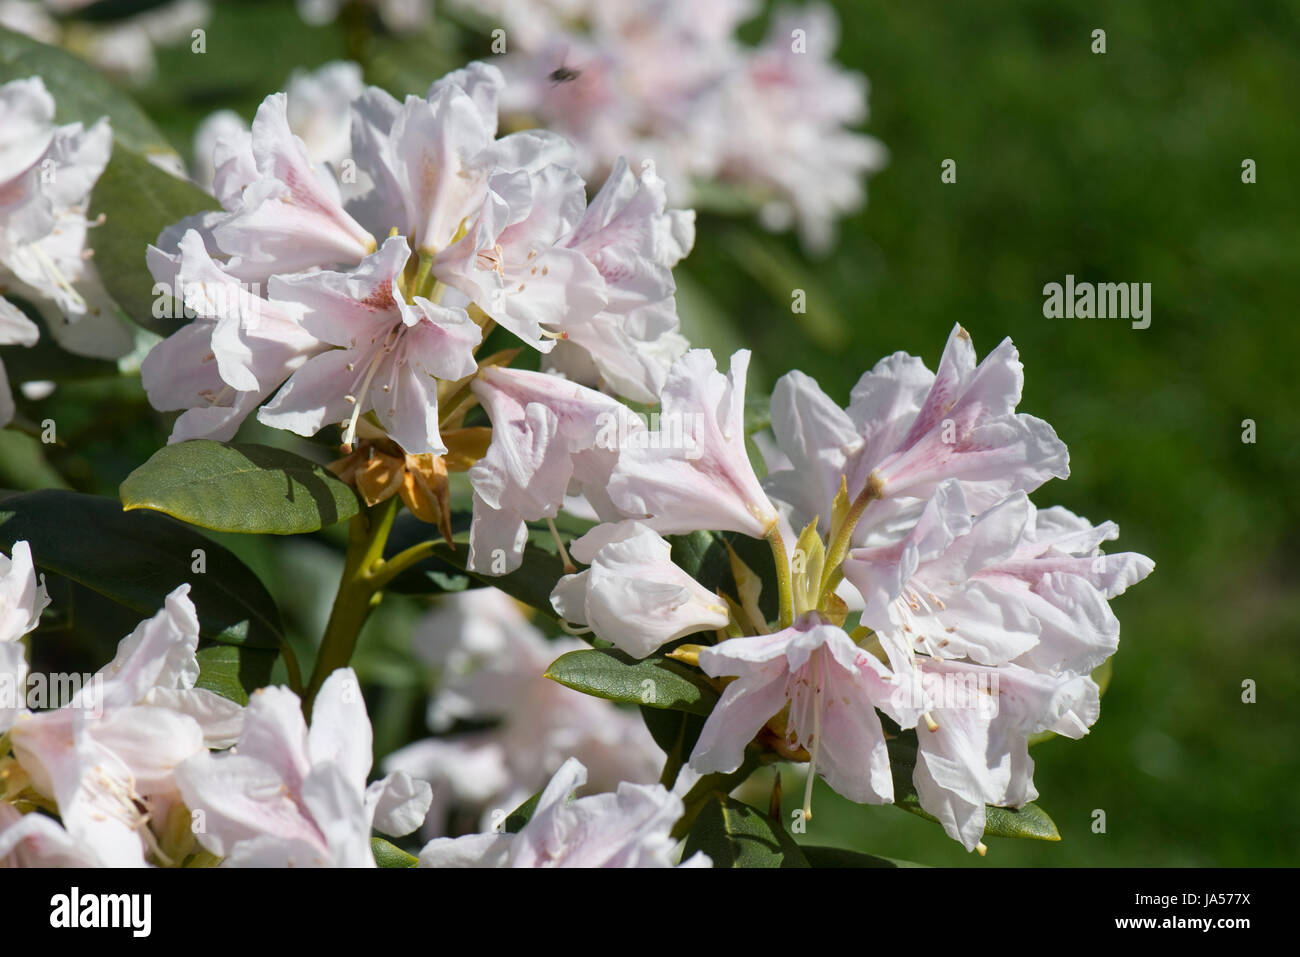 Flowers and leaves on Rhododendron 'Cunningham White', slight pink flowers on this spring flowerinf ericaceous shrub, Berkshire, April Stock Photo